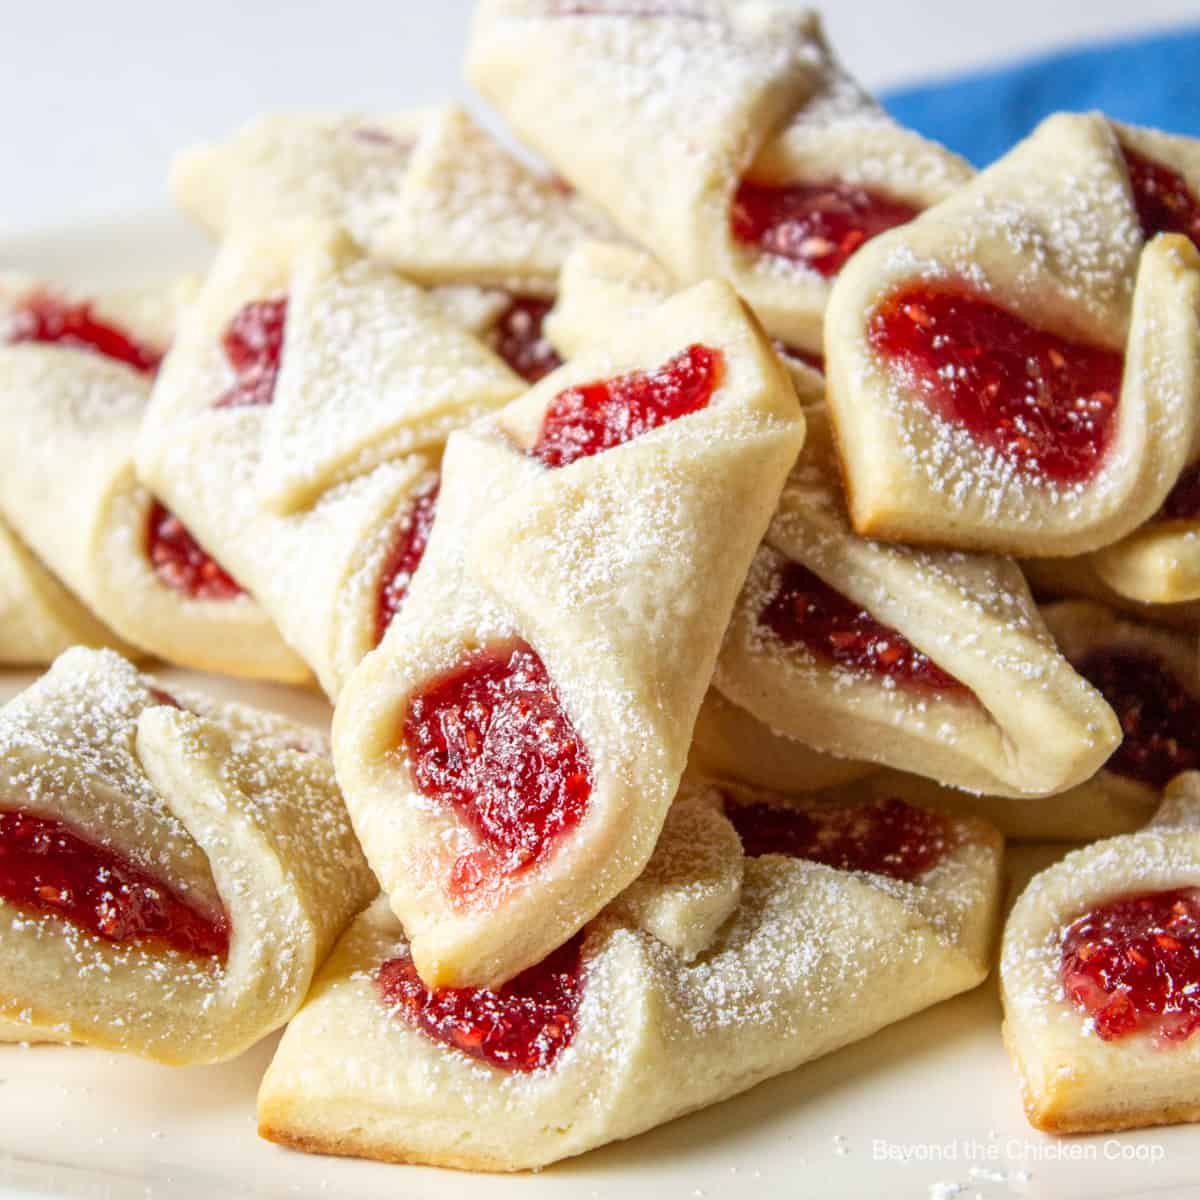 A pile of cookies filled with raspberry jam.